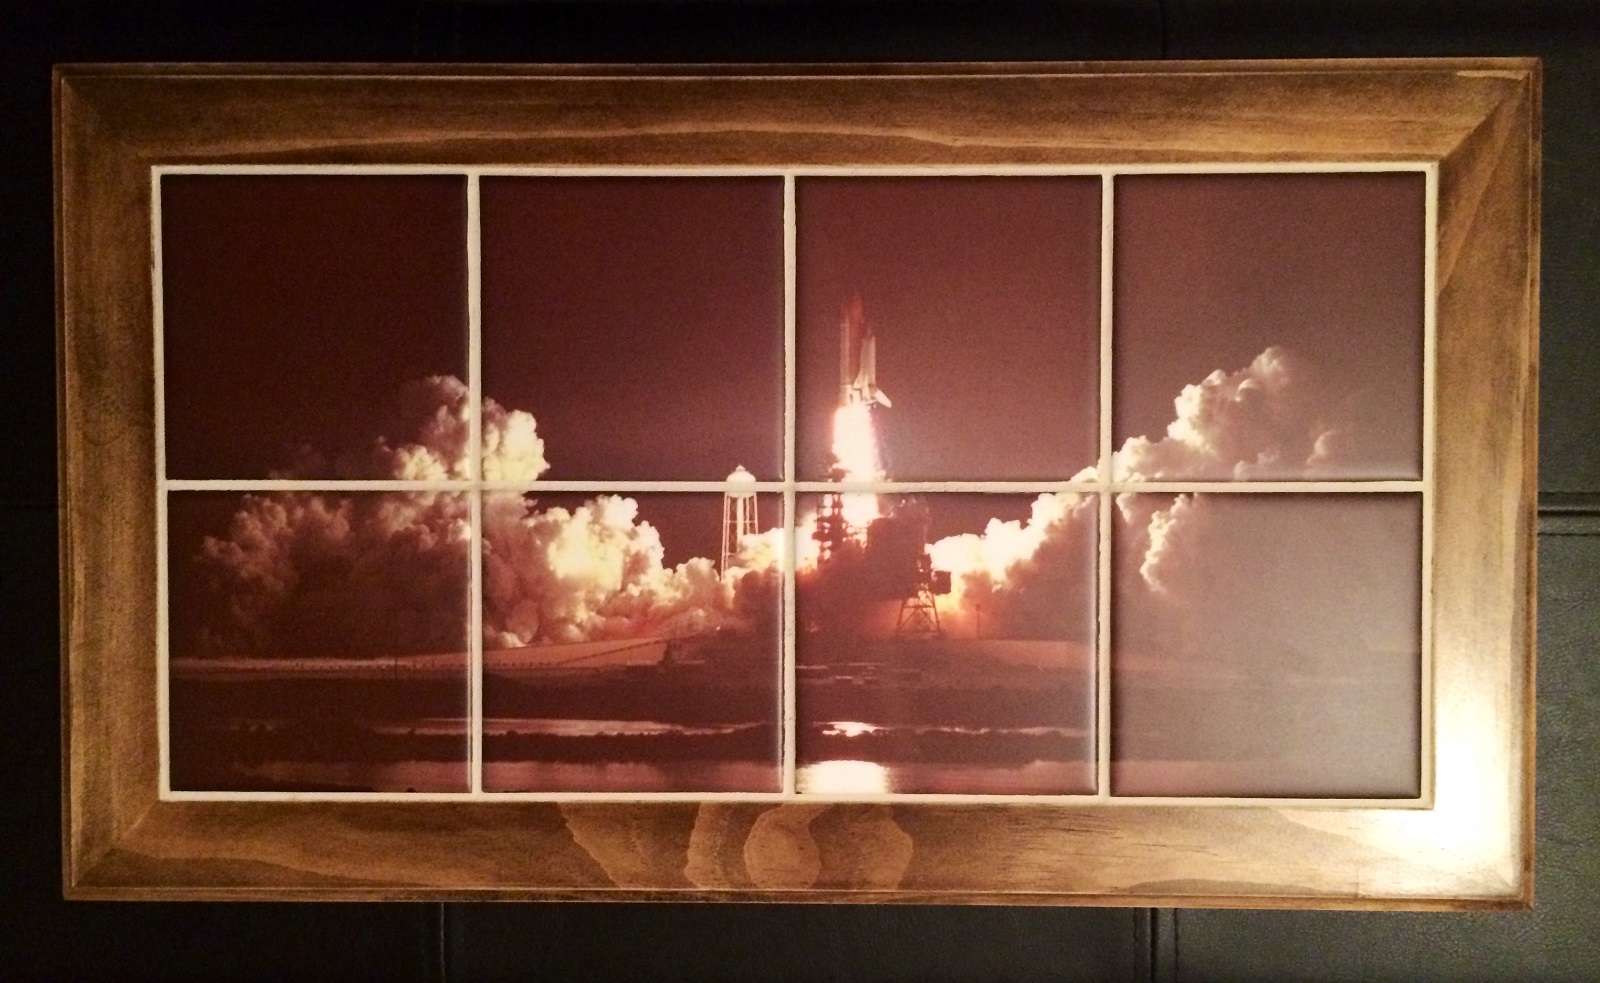 Shuttle Night Launch made with sublimation printing